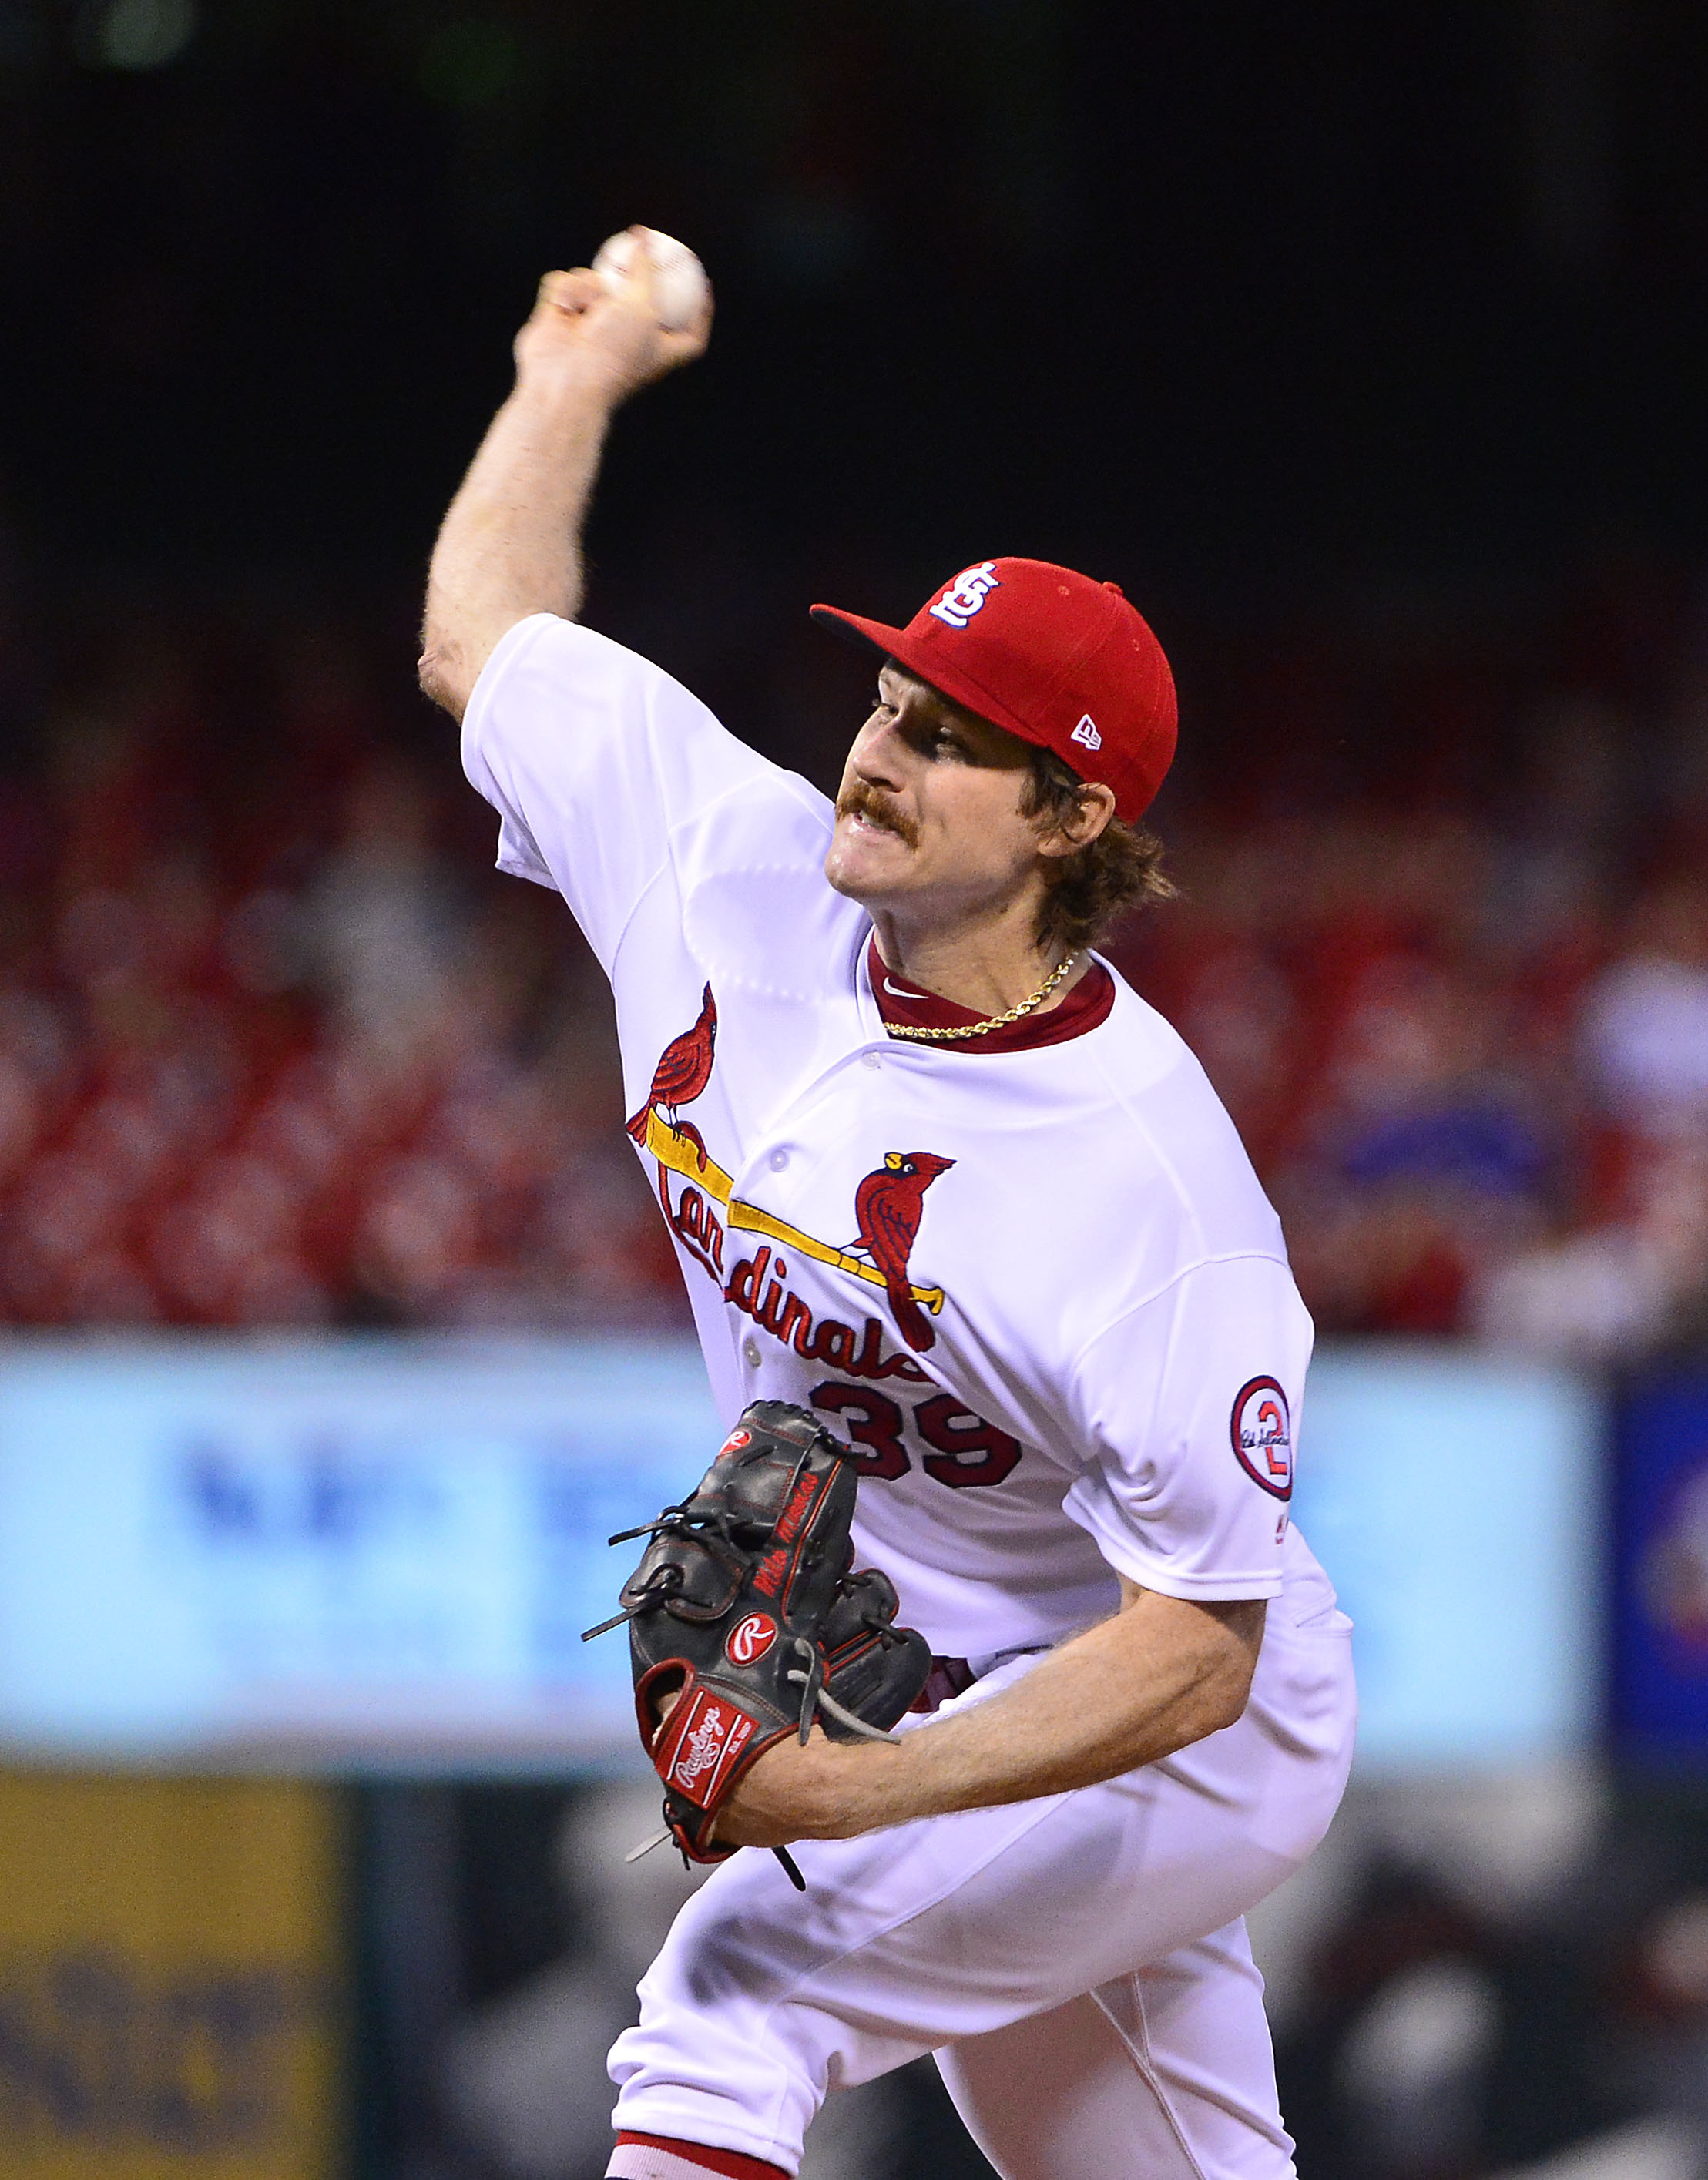 Miles Mikolas Blows No Hitter With 1 Pitch Left vs Pirates [2022